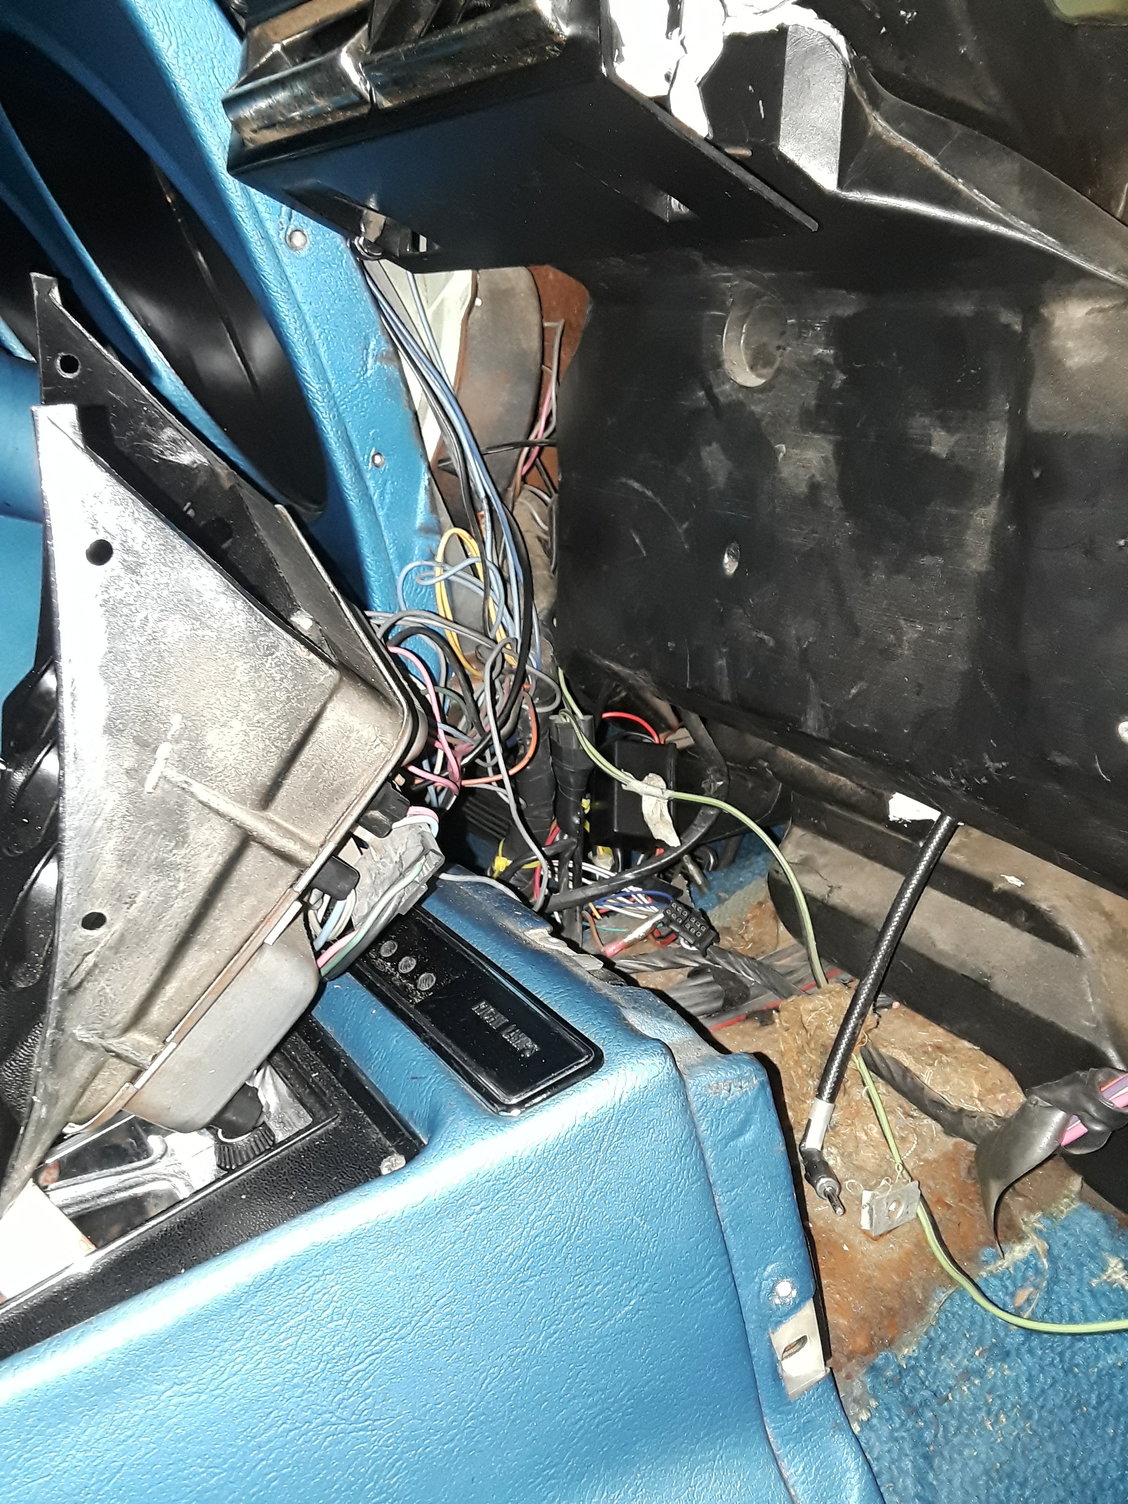 New Wiring Harness or try to repair the old? - CorvetteForum